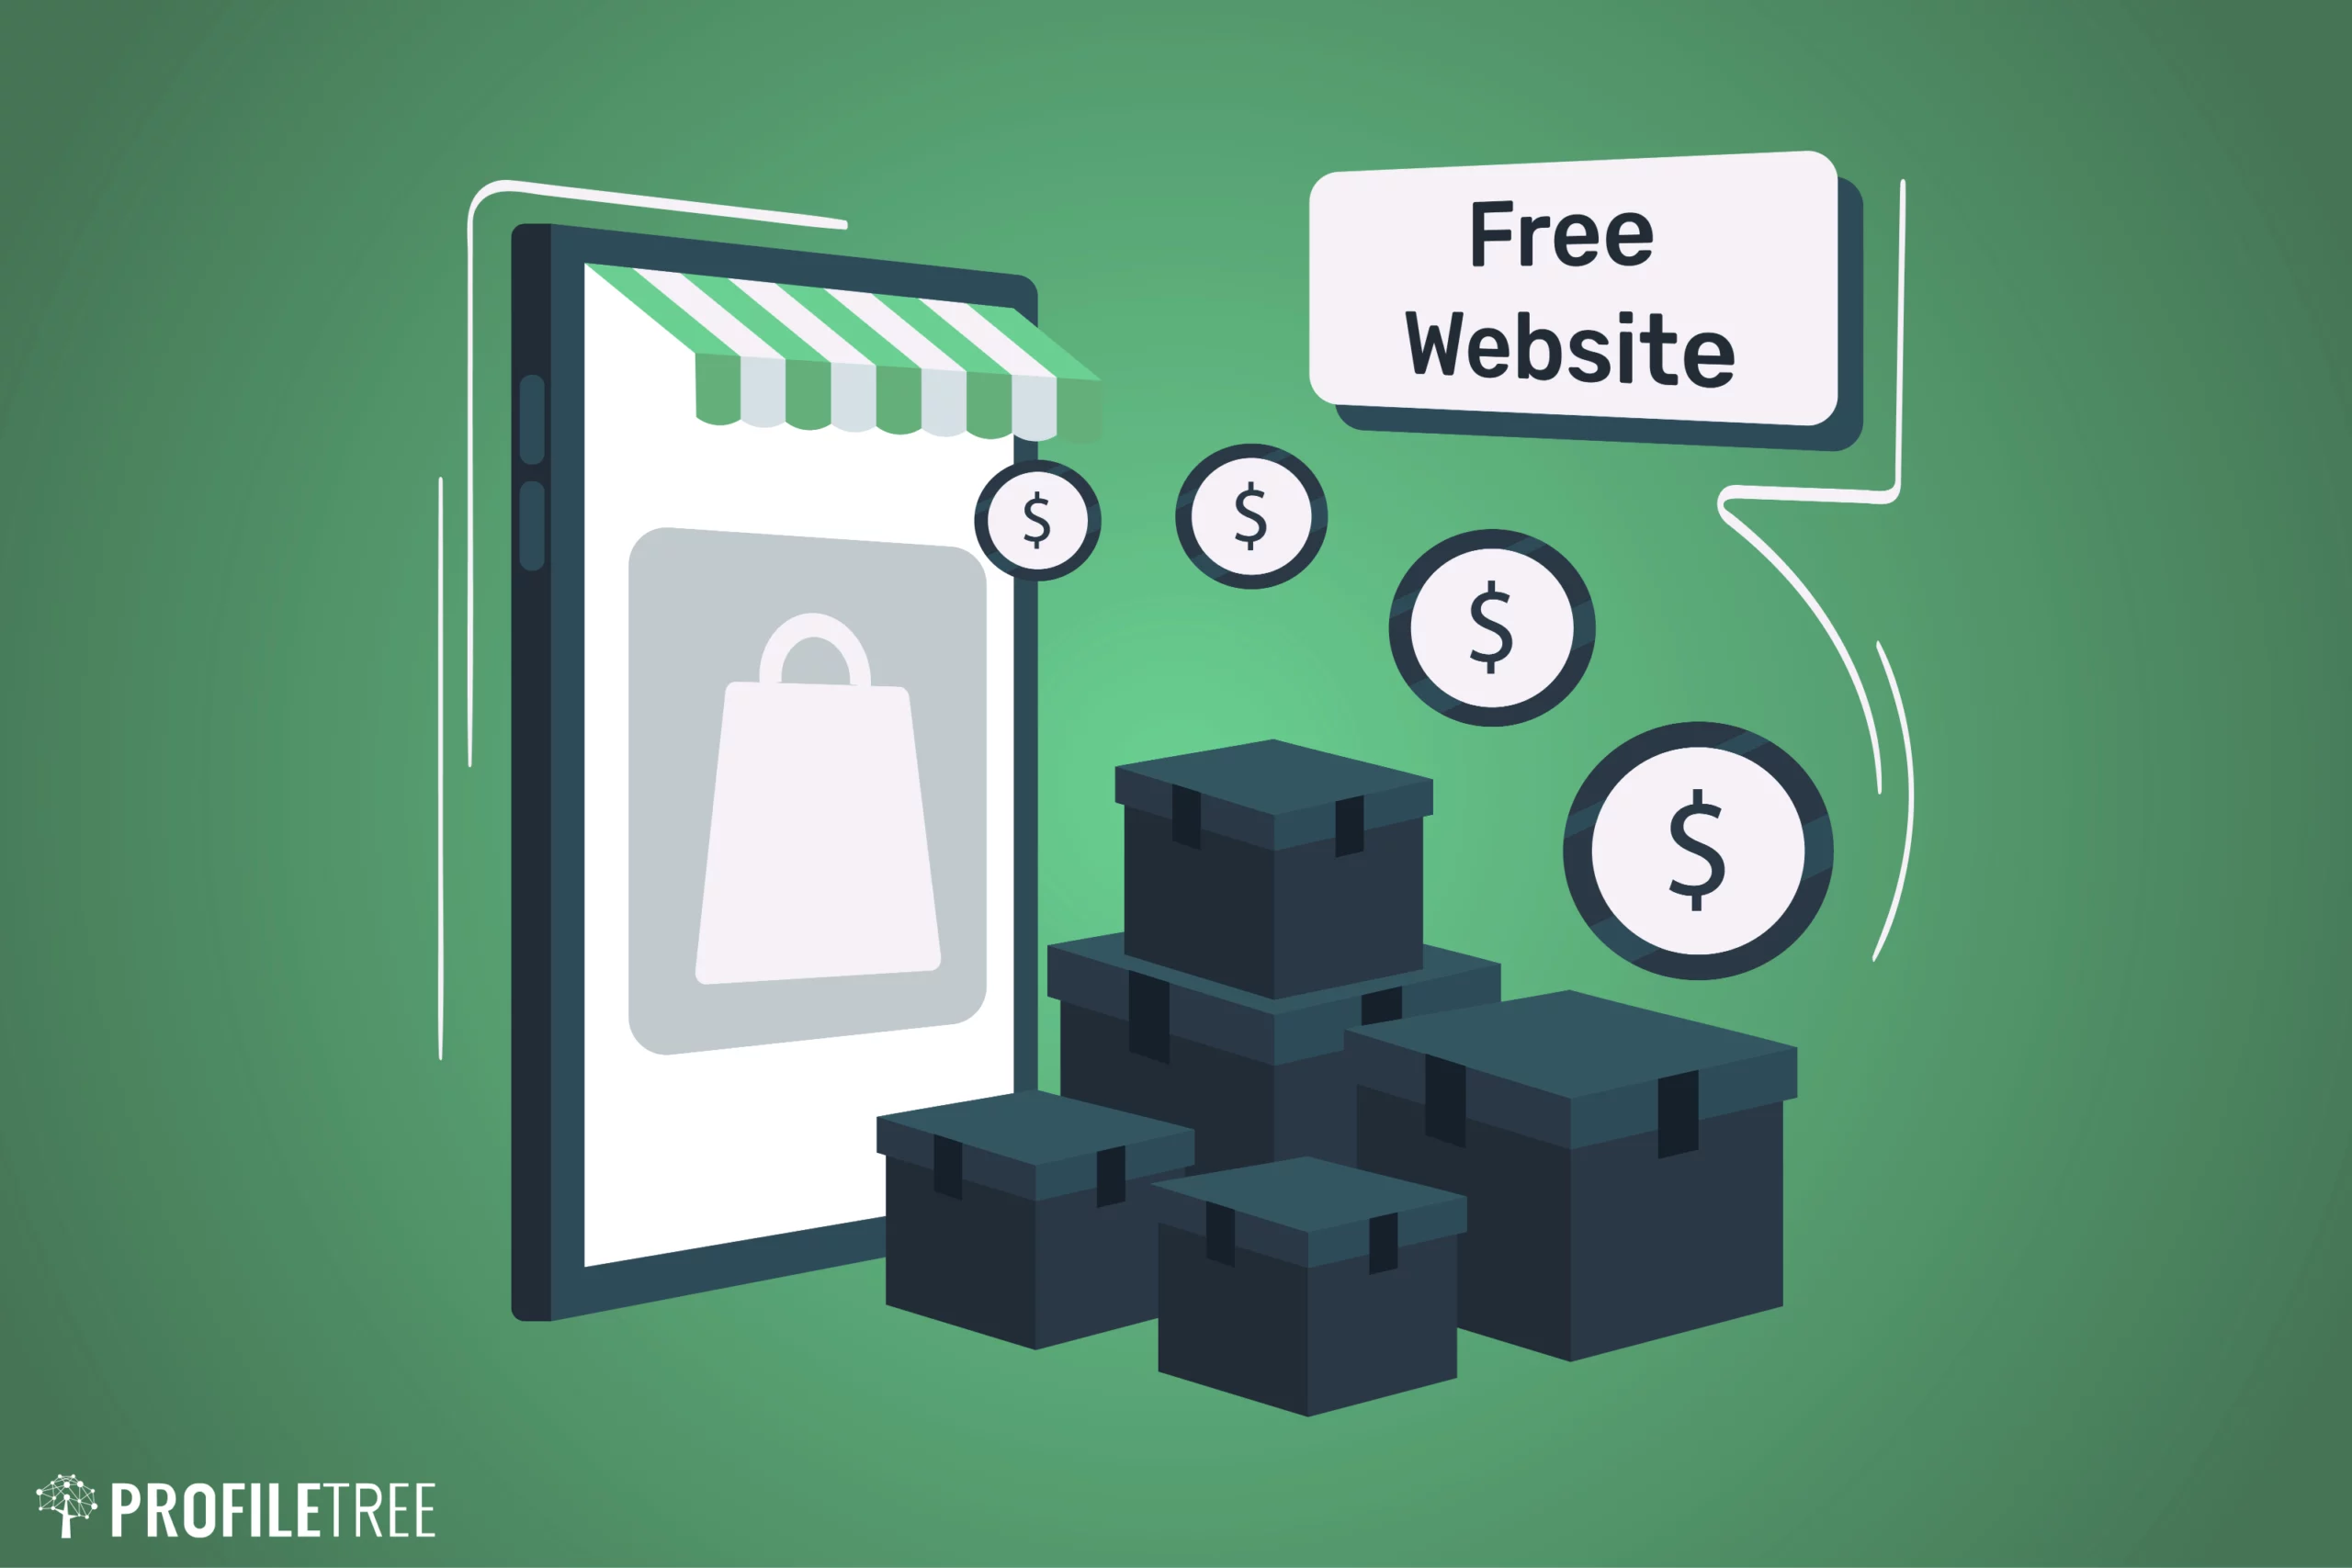 How to Build a Free Ecommerce Website | Wix | Build Wix Website | Wix Tutorial | Wix E-commerce